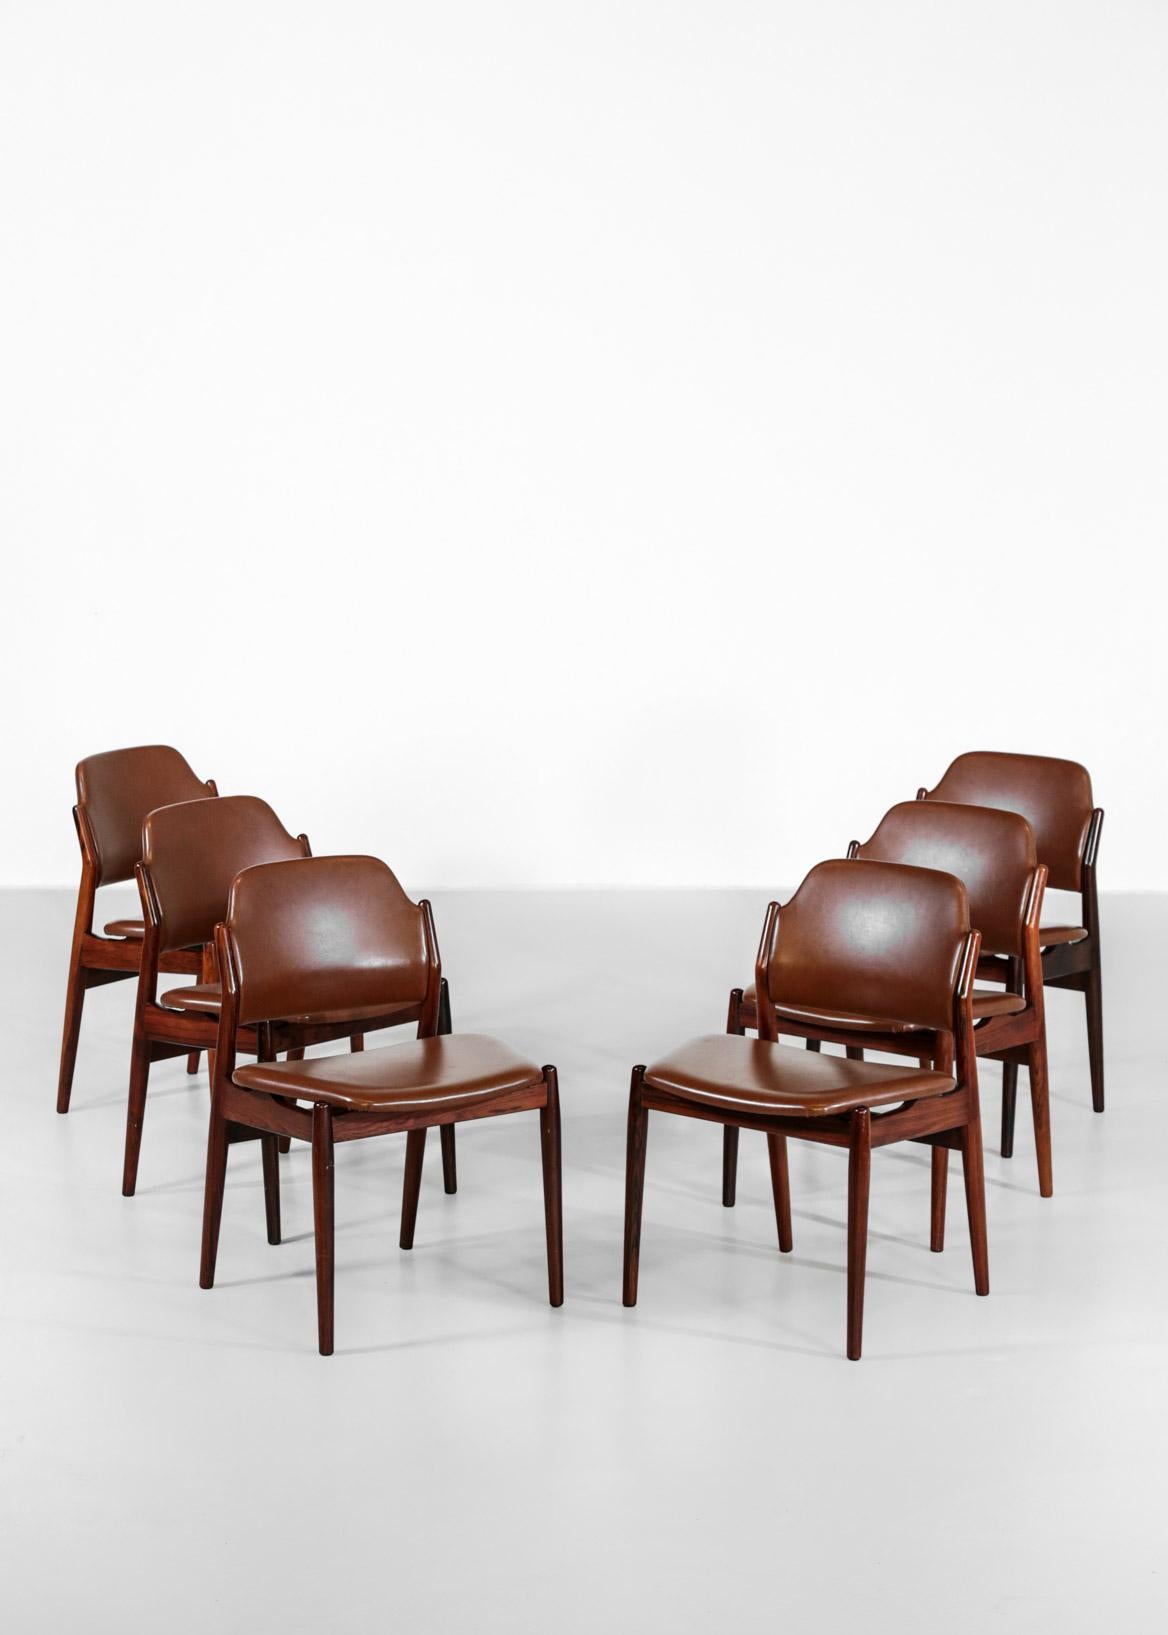 Rare set of 6 chairs by Arne Vodder for Sibast. 
Original faux leather in excellent quality. 
Amazing rosewood grain.